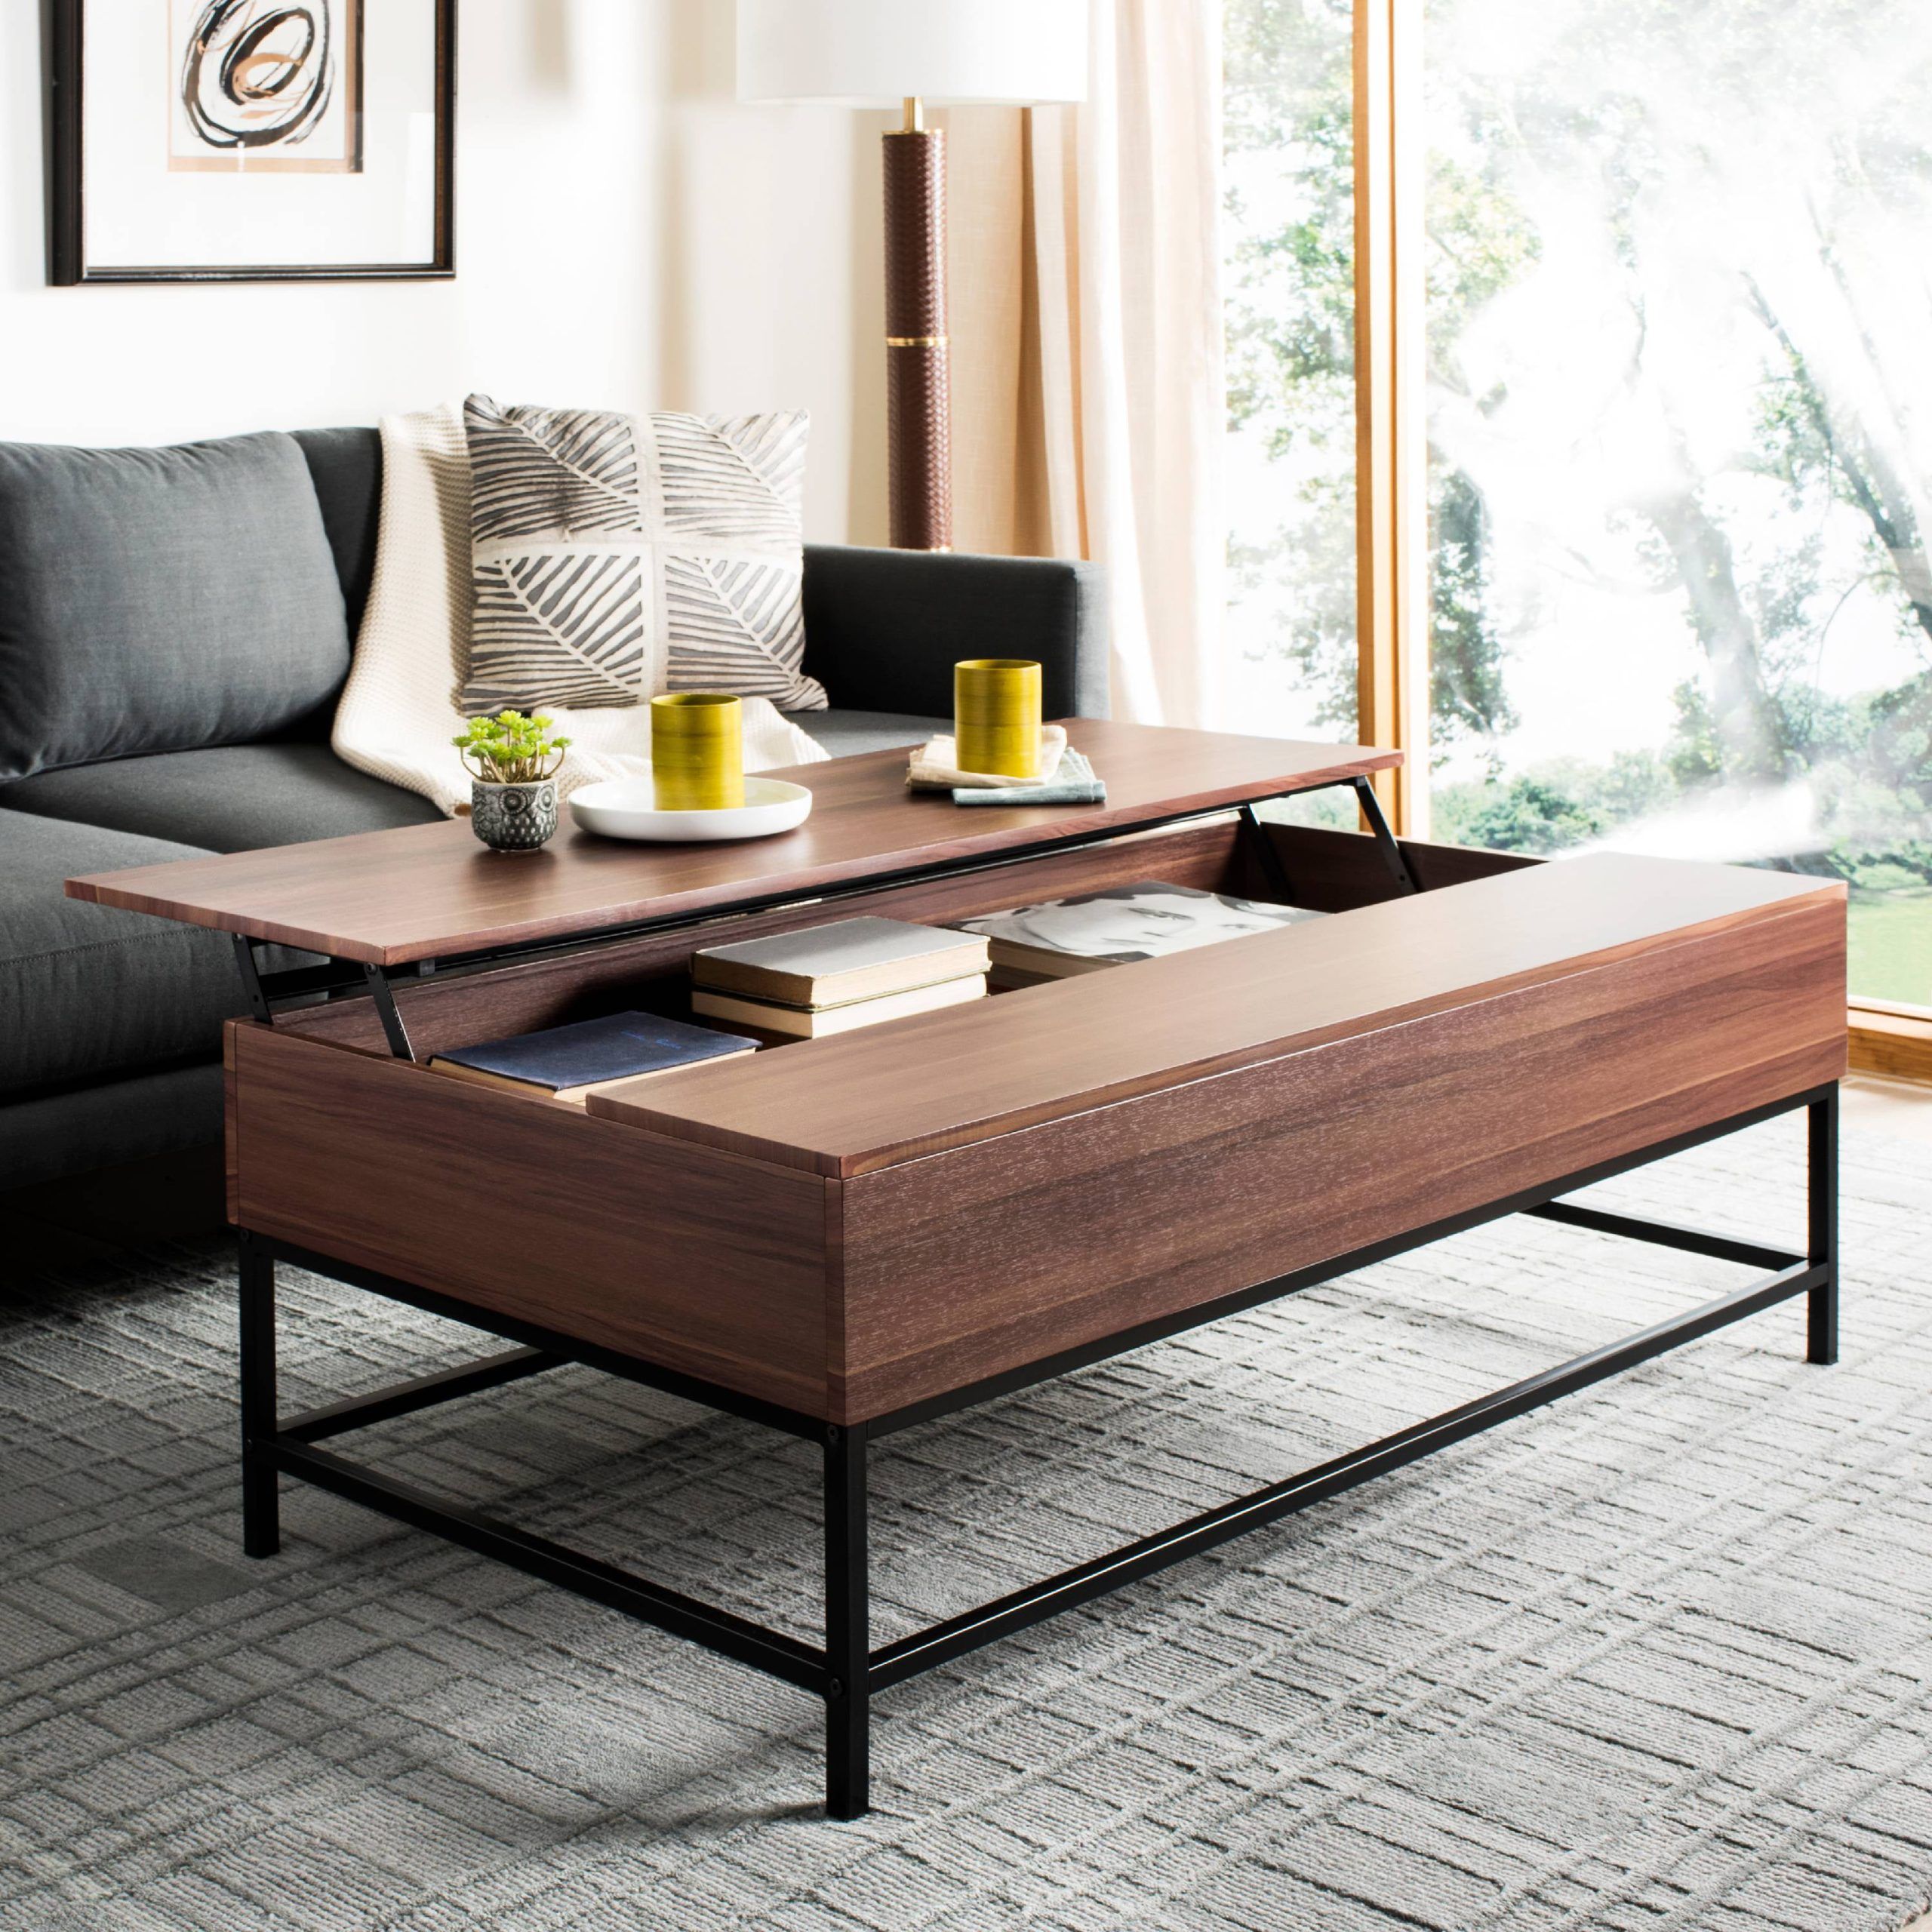 Safavieh Gina Contemporary Lift Top Coffee Table With Storage – Walmart Intended For Modern Wooden Lift Top Tables (View 10 of 20)